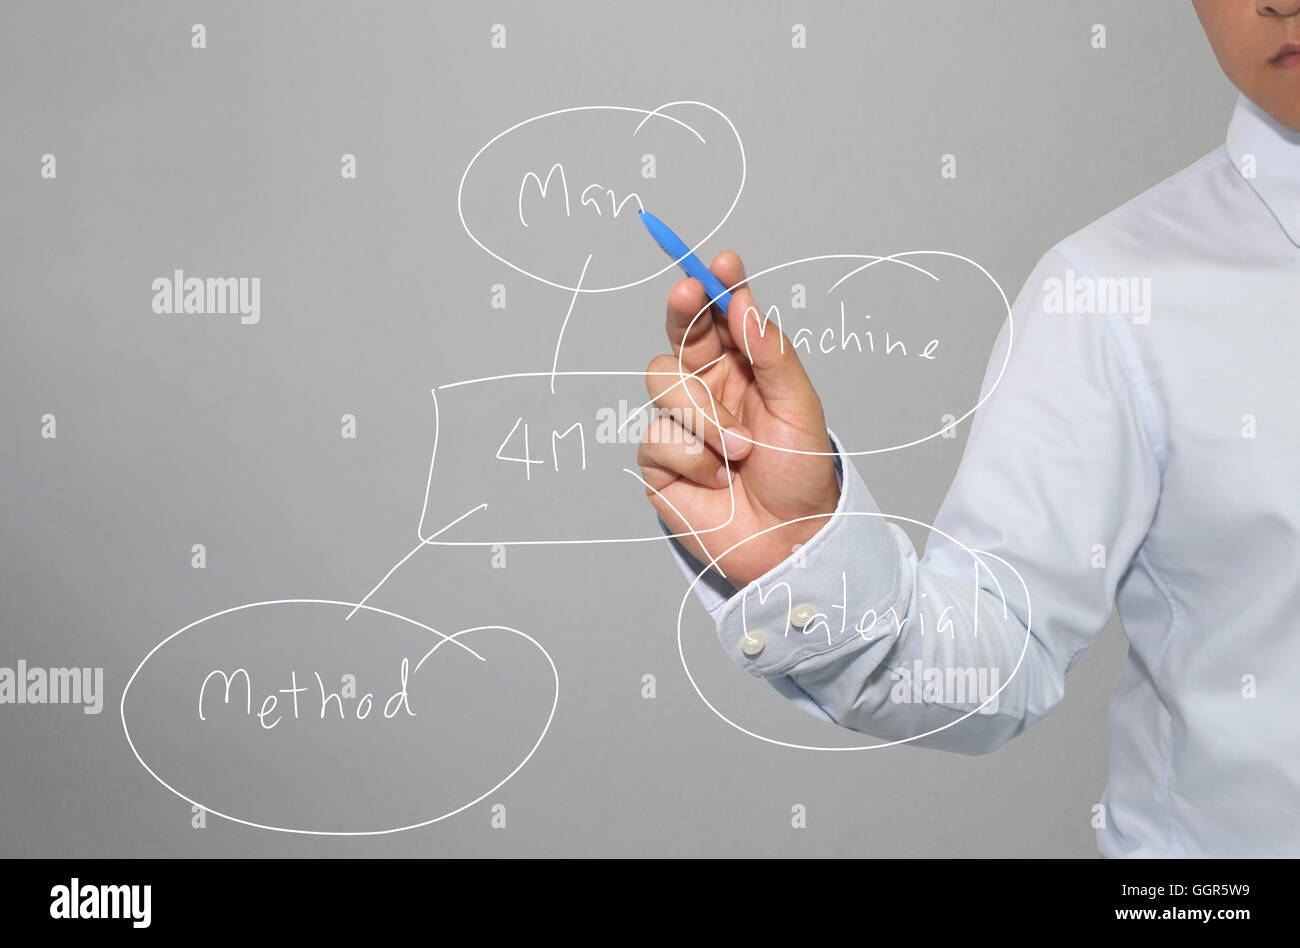 Hand of businessman drawing graphics a symbols geometric shapes graph to input information concept of 4M management system and h Stock Photo